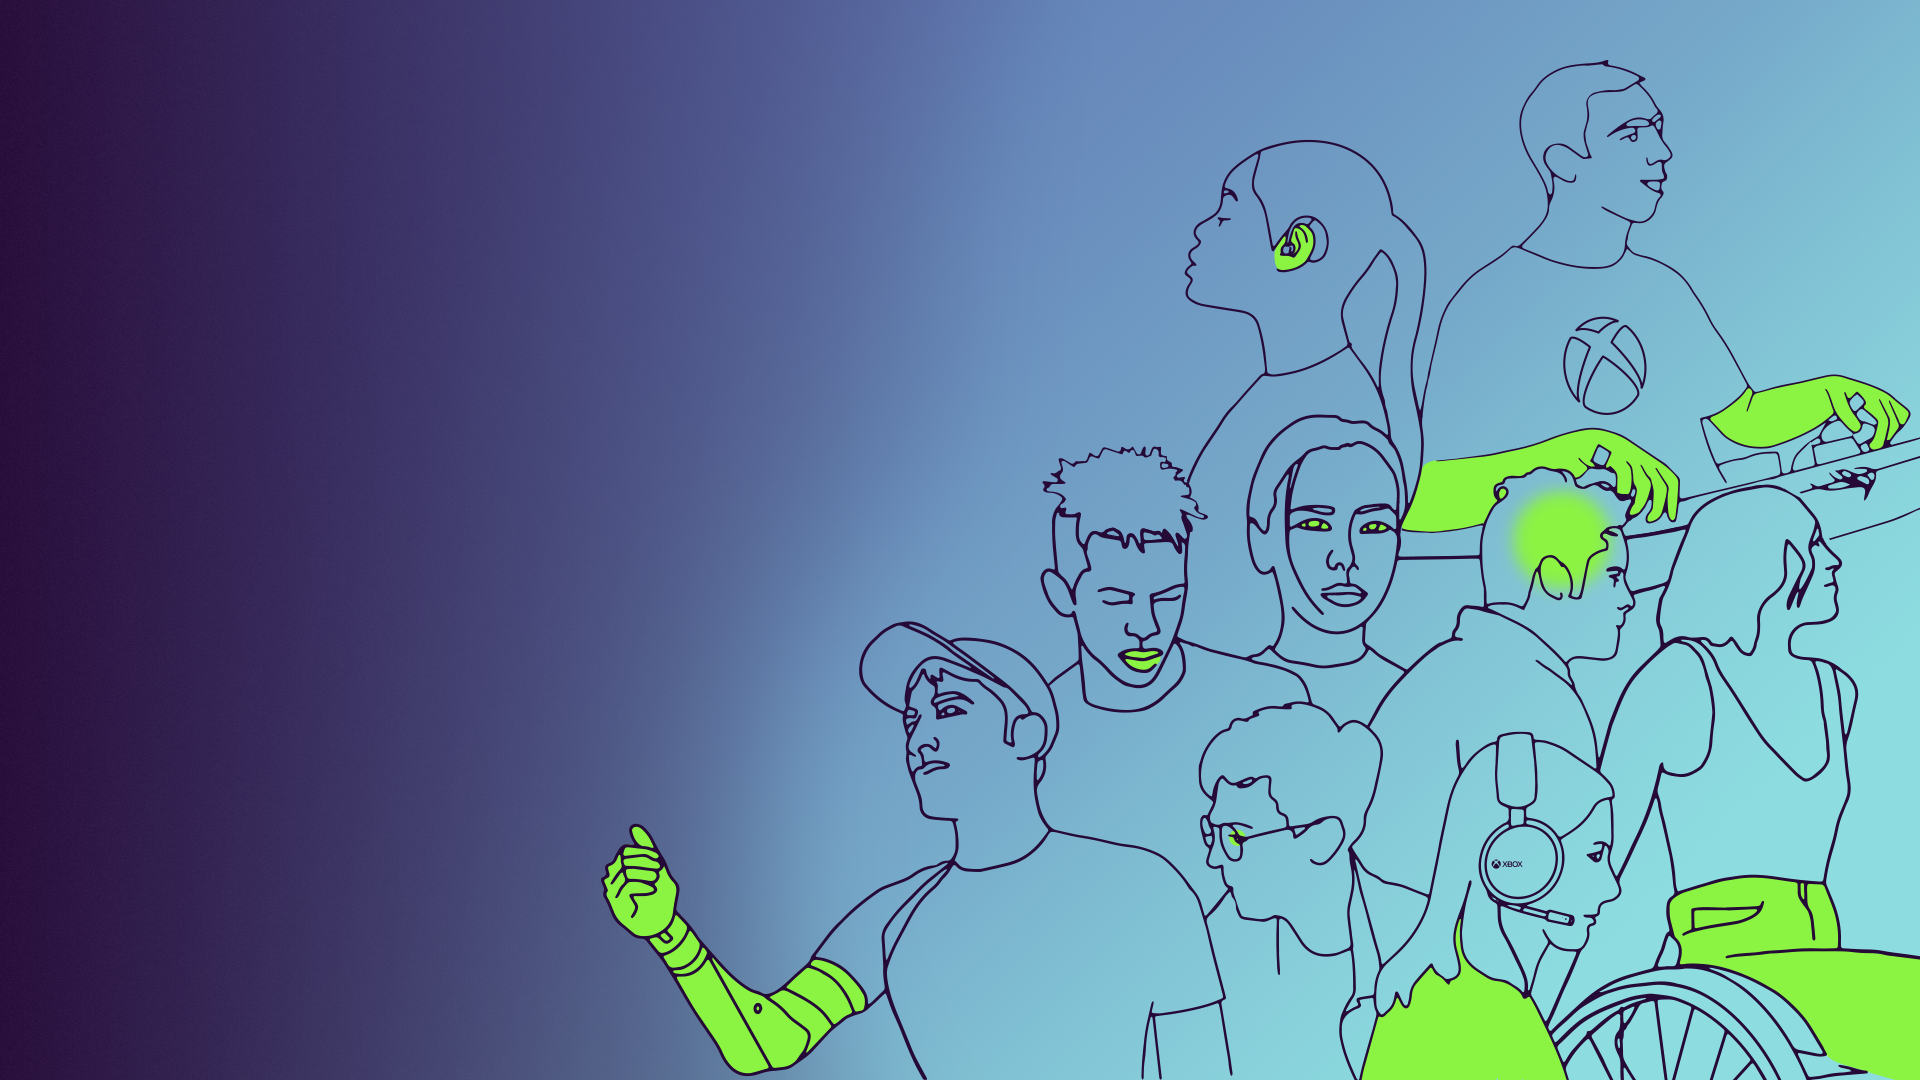 Line drawings of people with different disabilities highlighted in neon green on a blue gradient background.